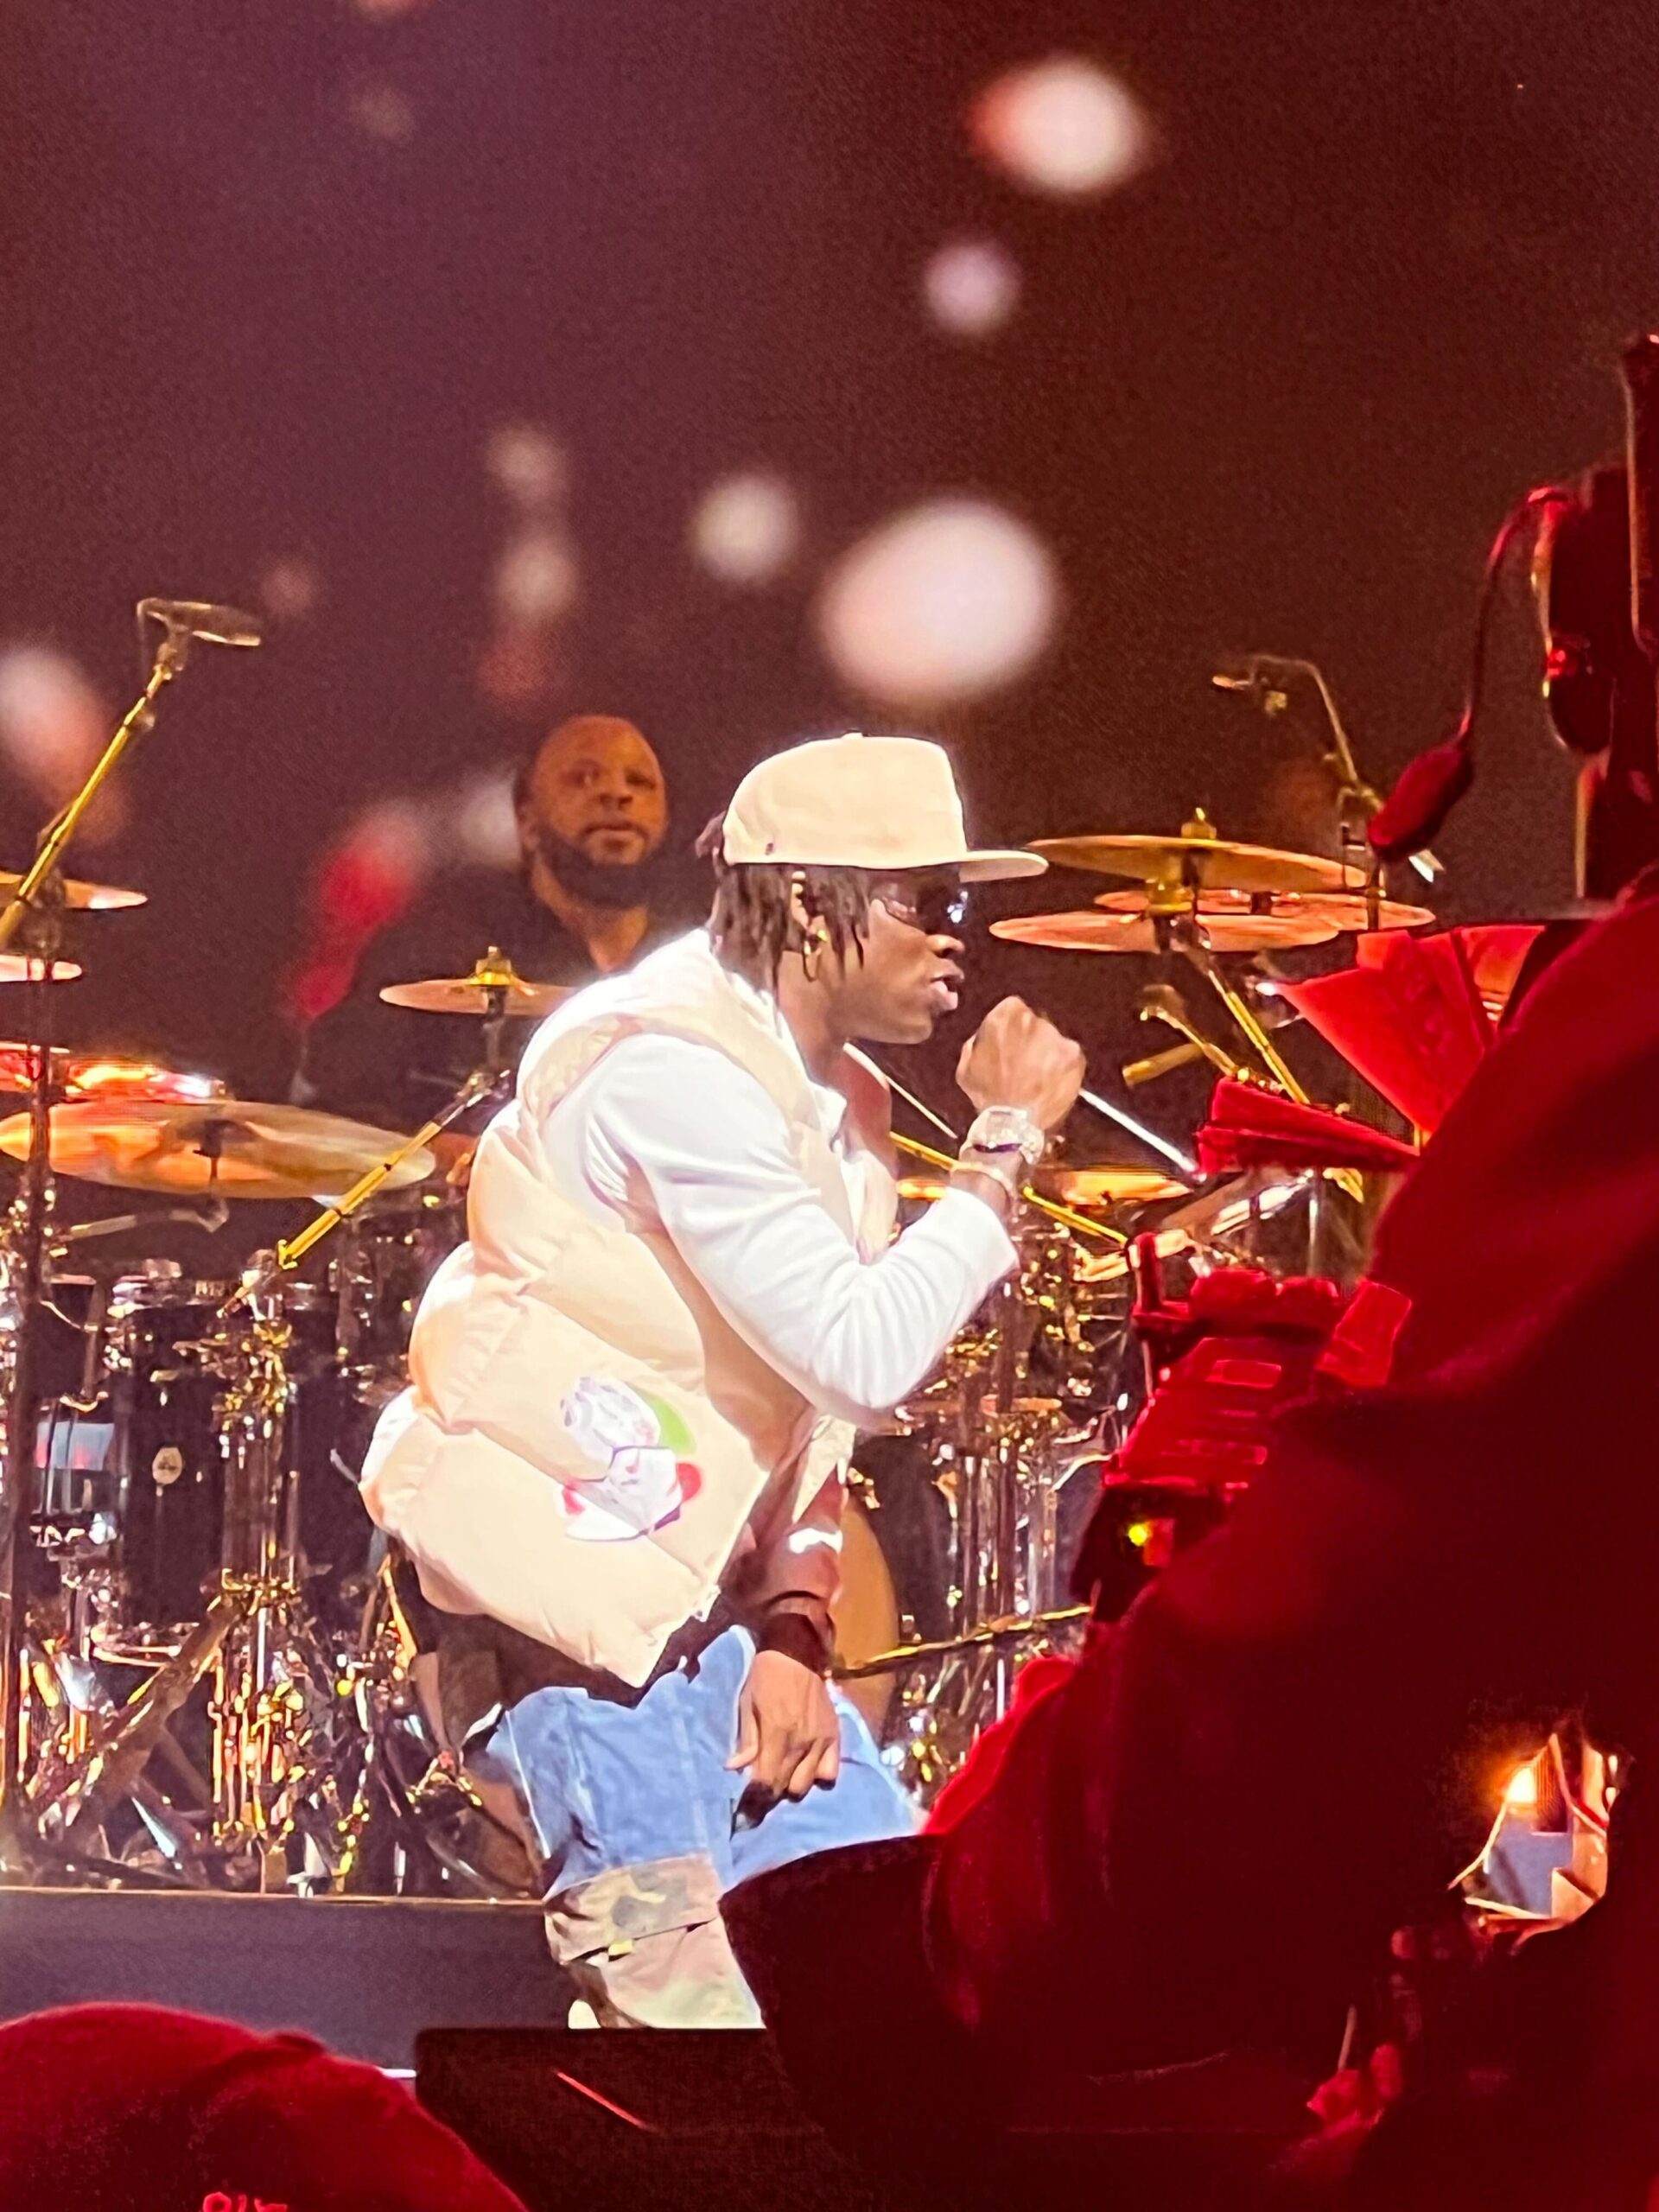 Nigerian Singers, Tems, Burna Boy and Rema Perform at the NBA all-star game (Video)